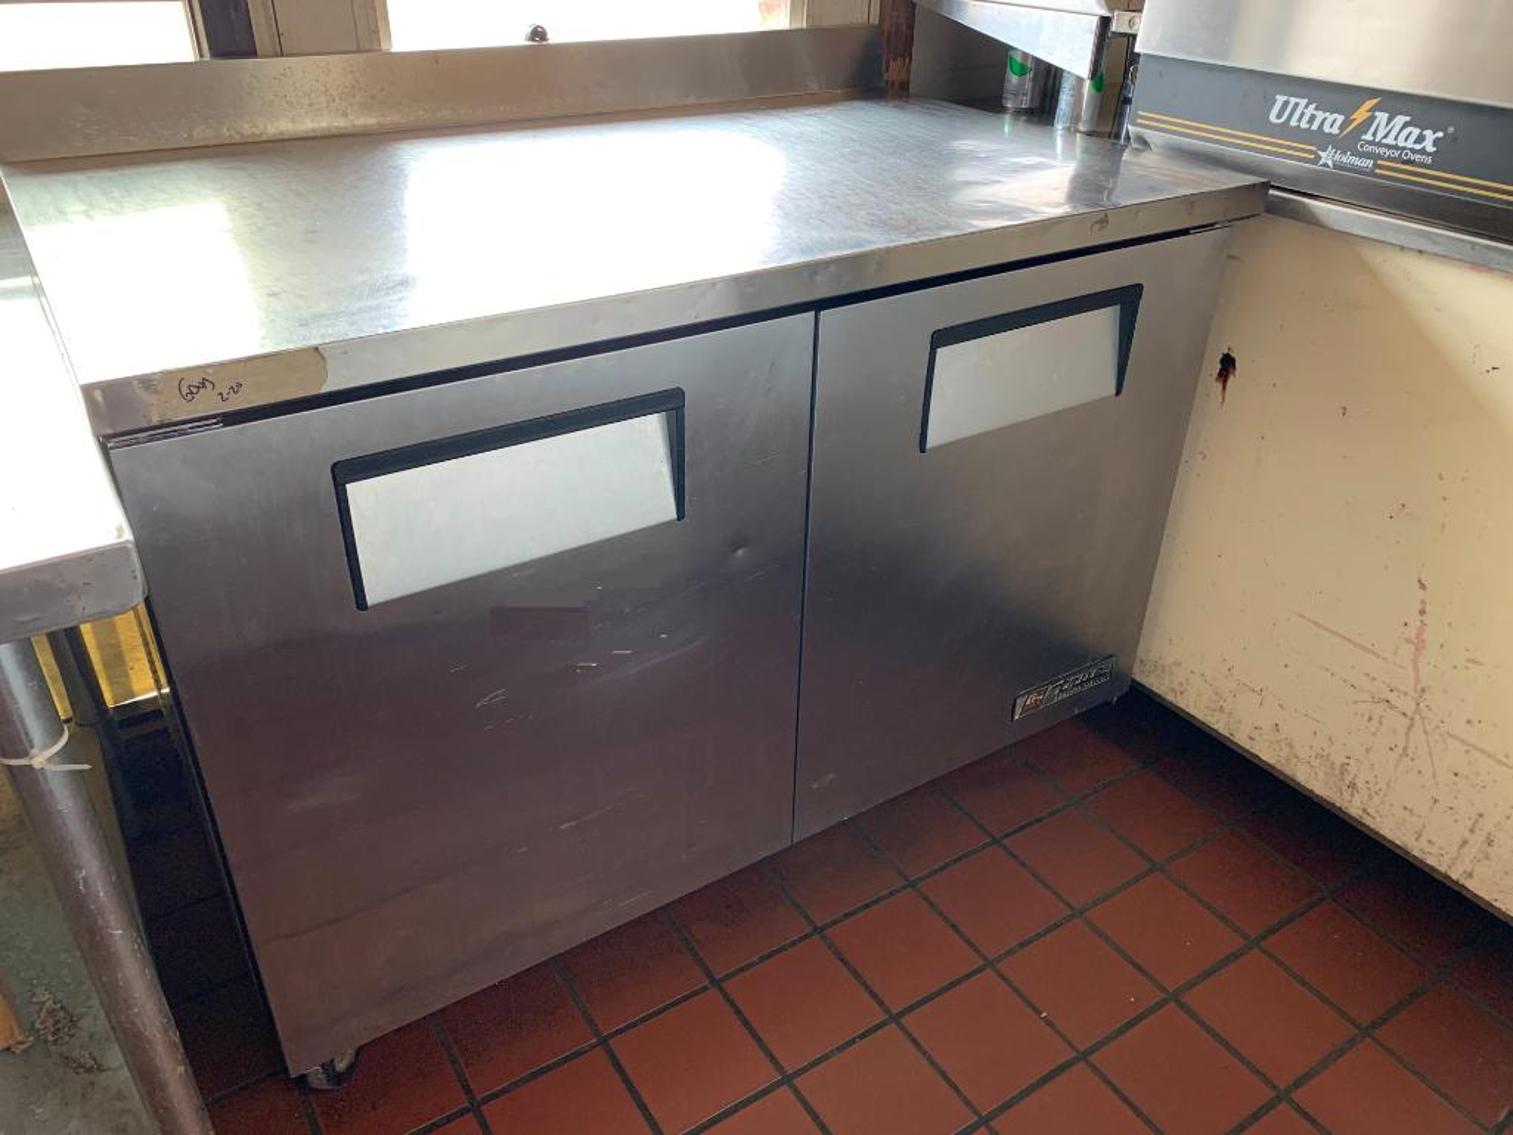 Restaurant Equipment: Walk In Freezers, Refrigeration, Coolers, Racking, Stainless Steel Tables & Smallwares